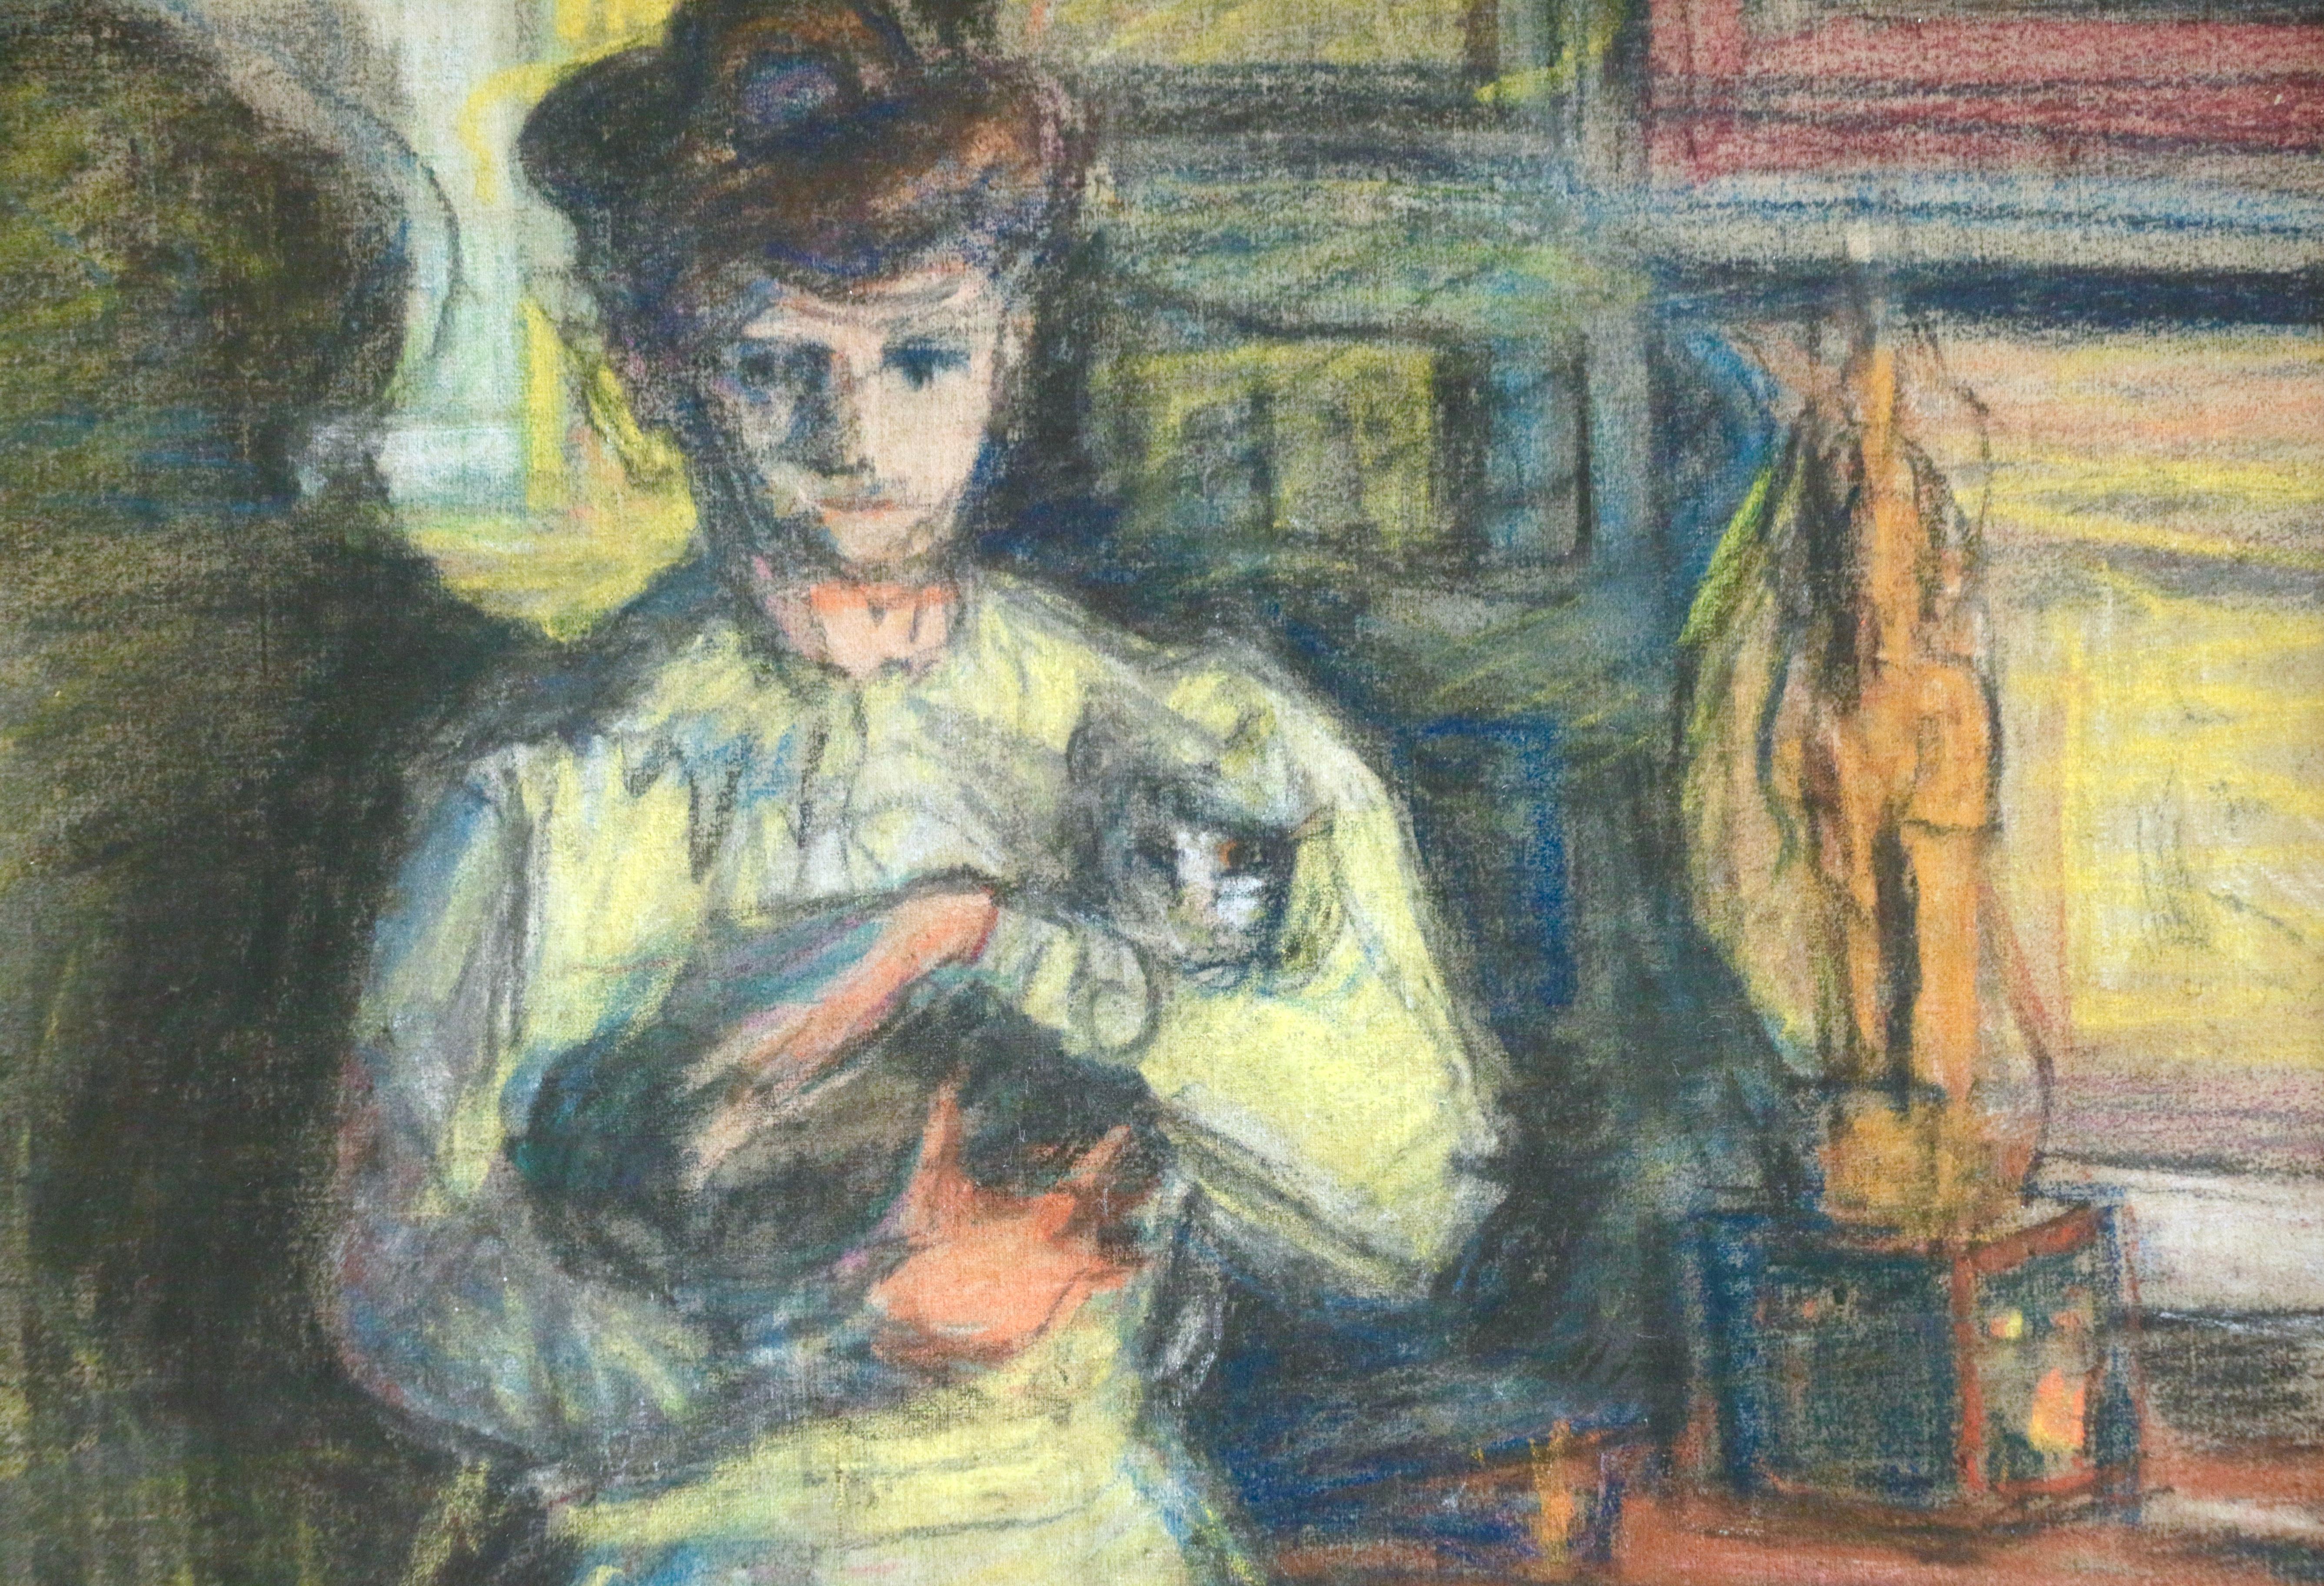 Young Girl with Cat - Impressionist Art by Achille-Émile Othon Friesz